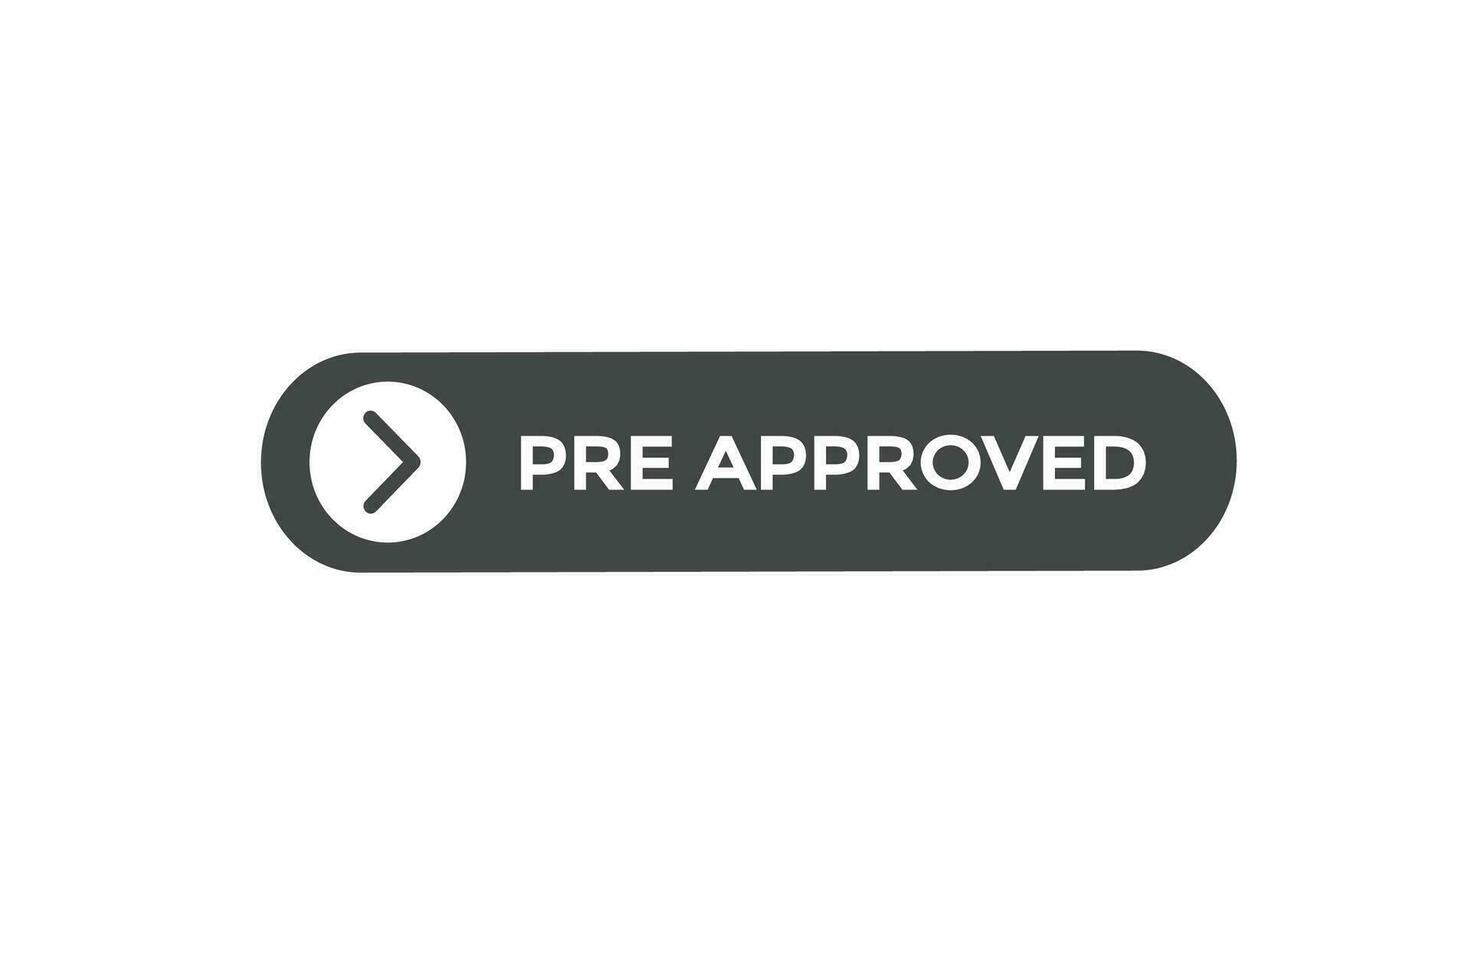 new pre approved, website, click button, level, sign, speech, bubble  banner, vector